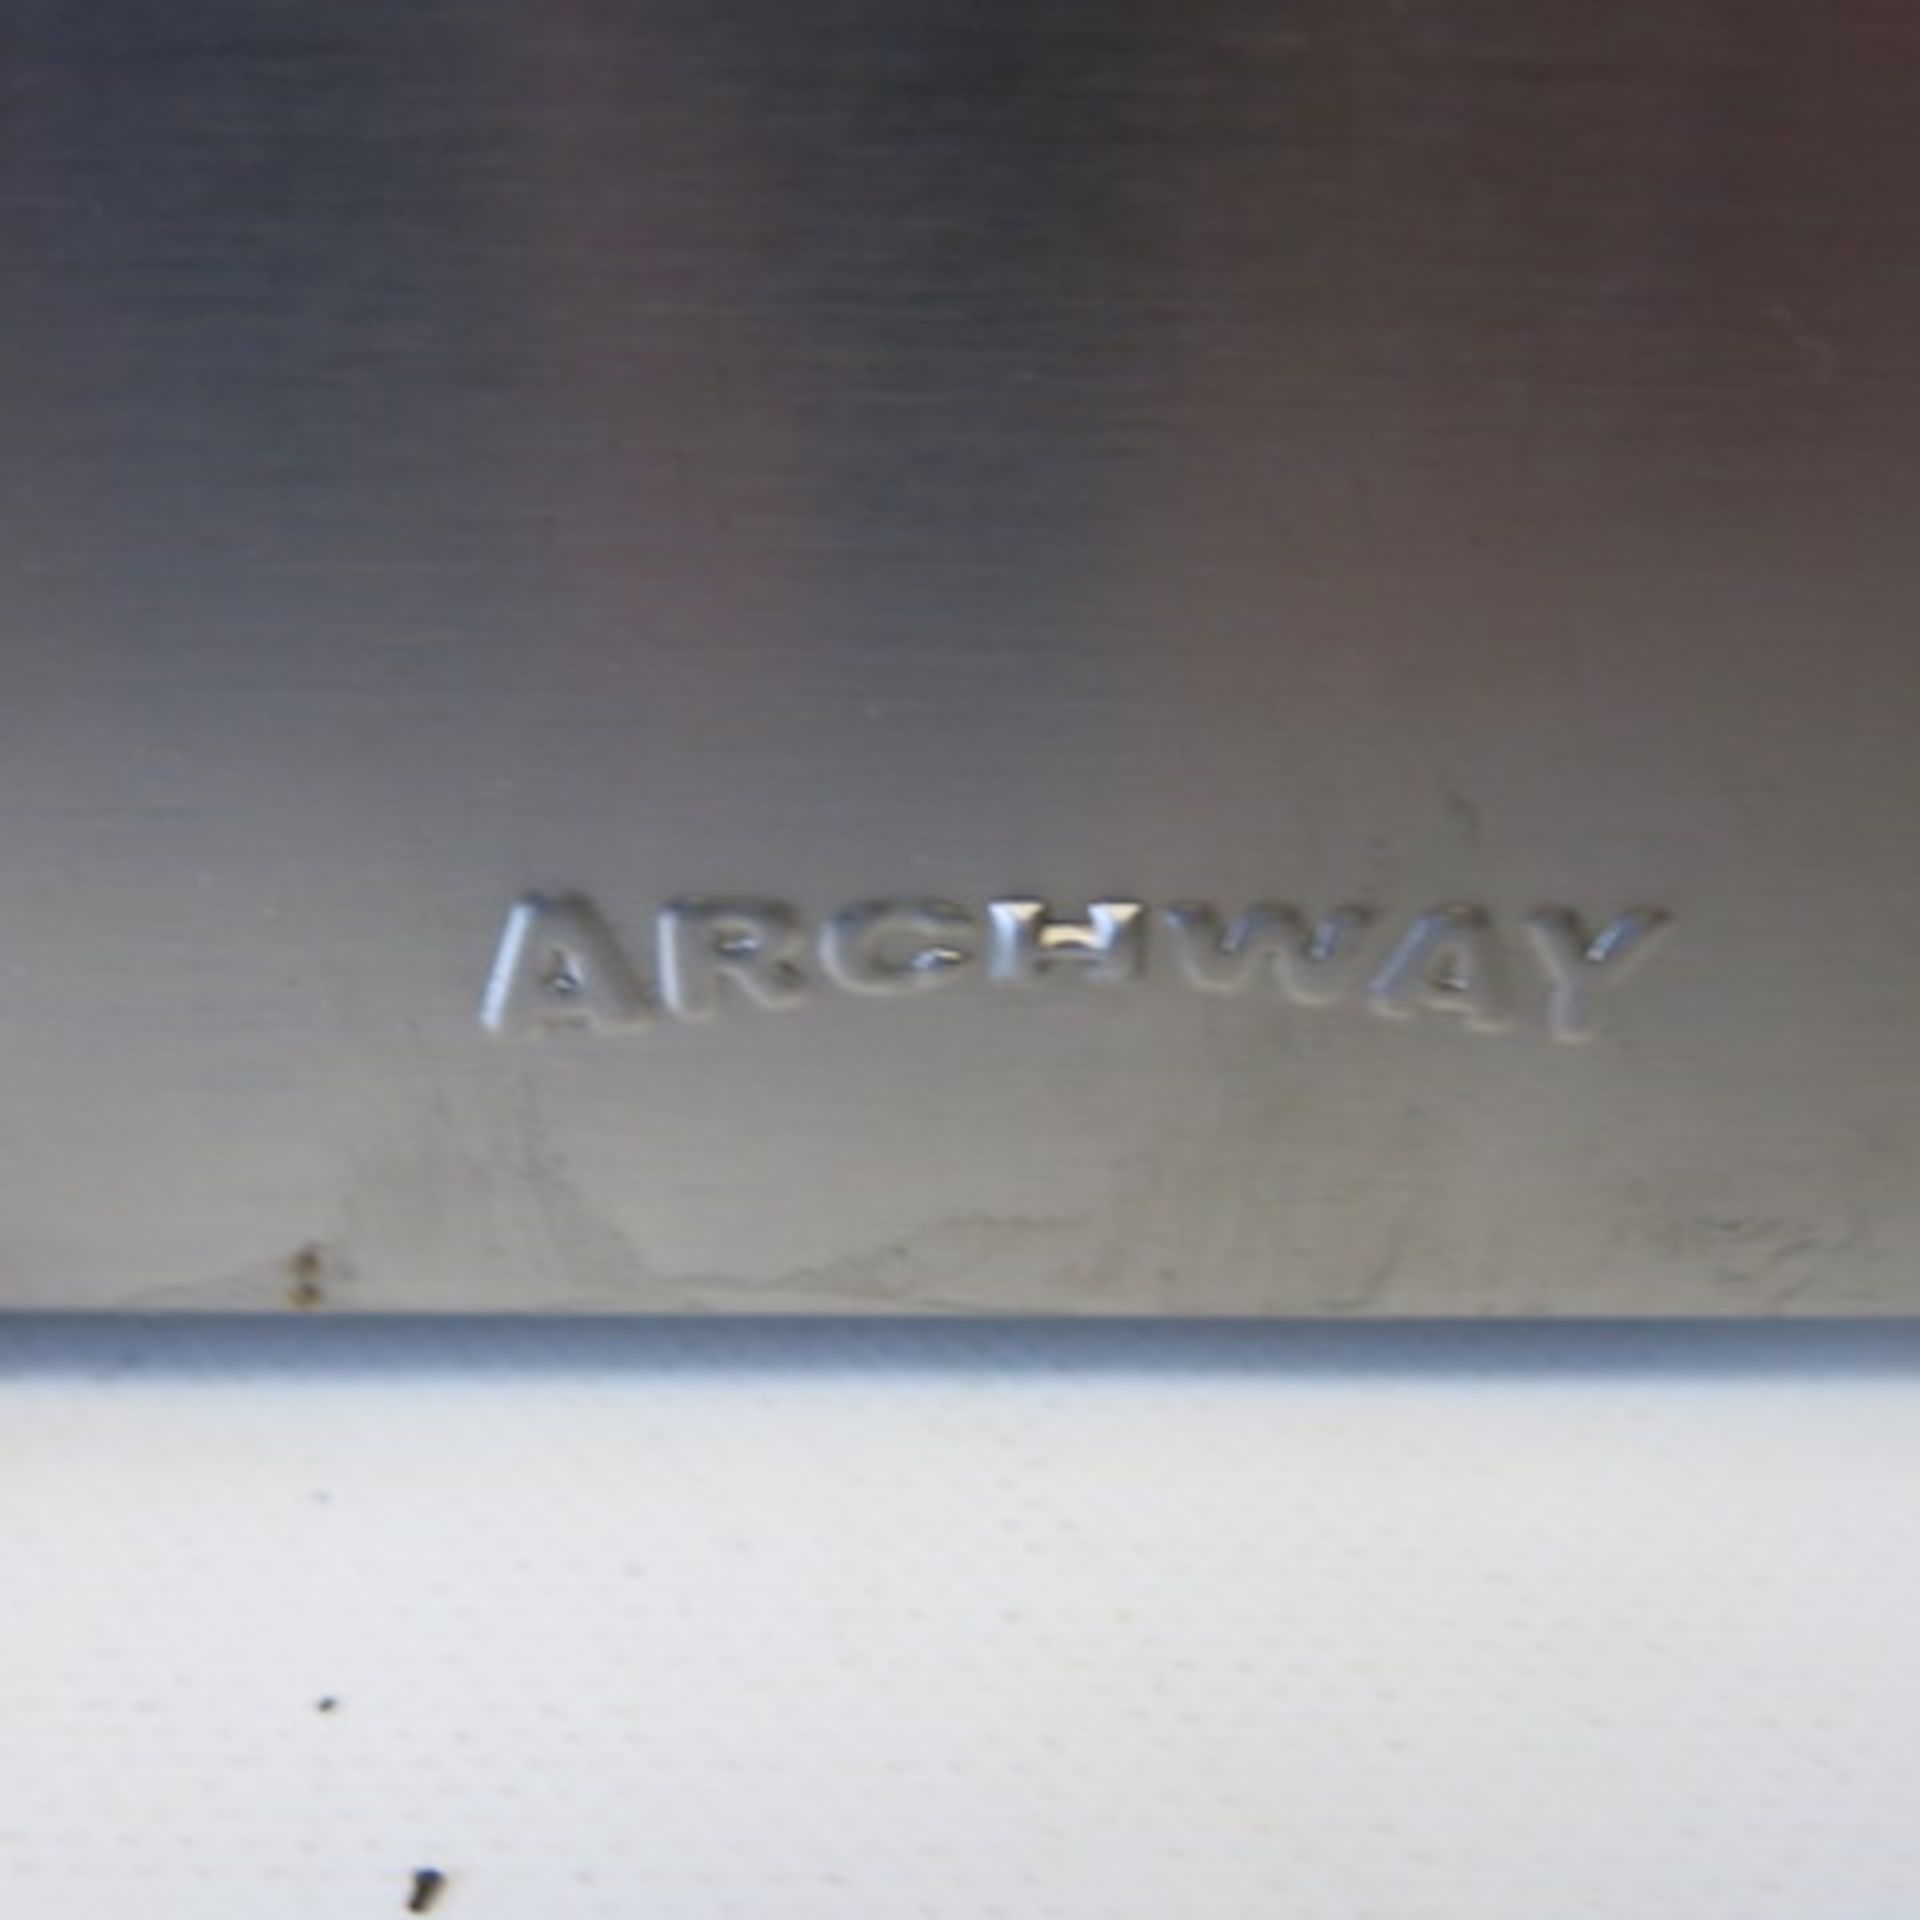 Archway 4 Pot Bain Marie, Model 4PW/E - Image 2 of 7